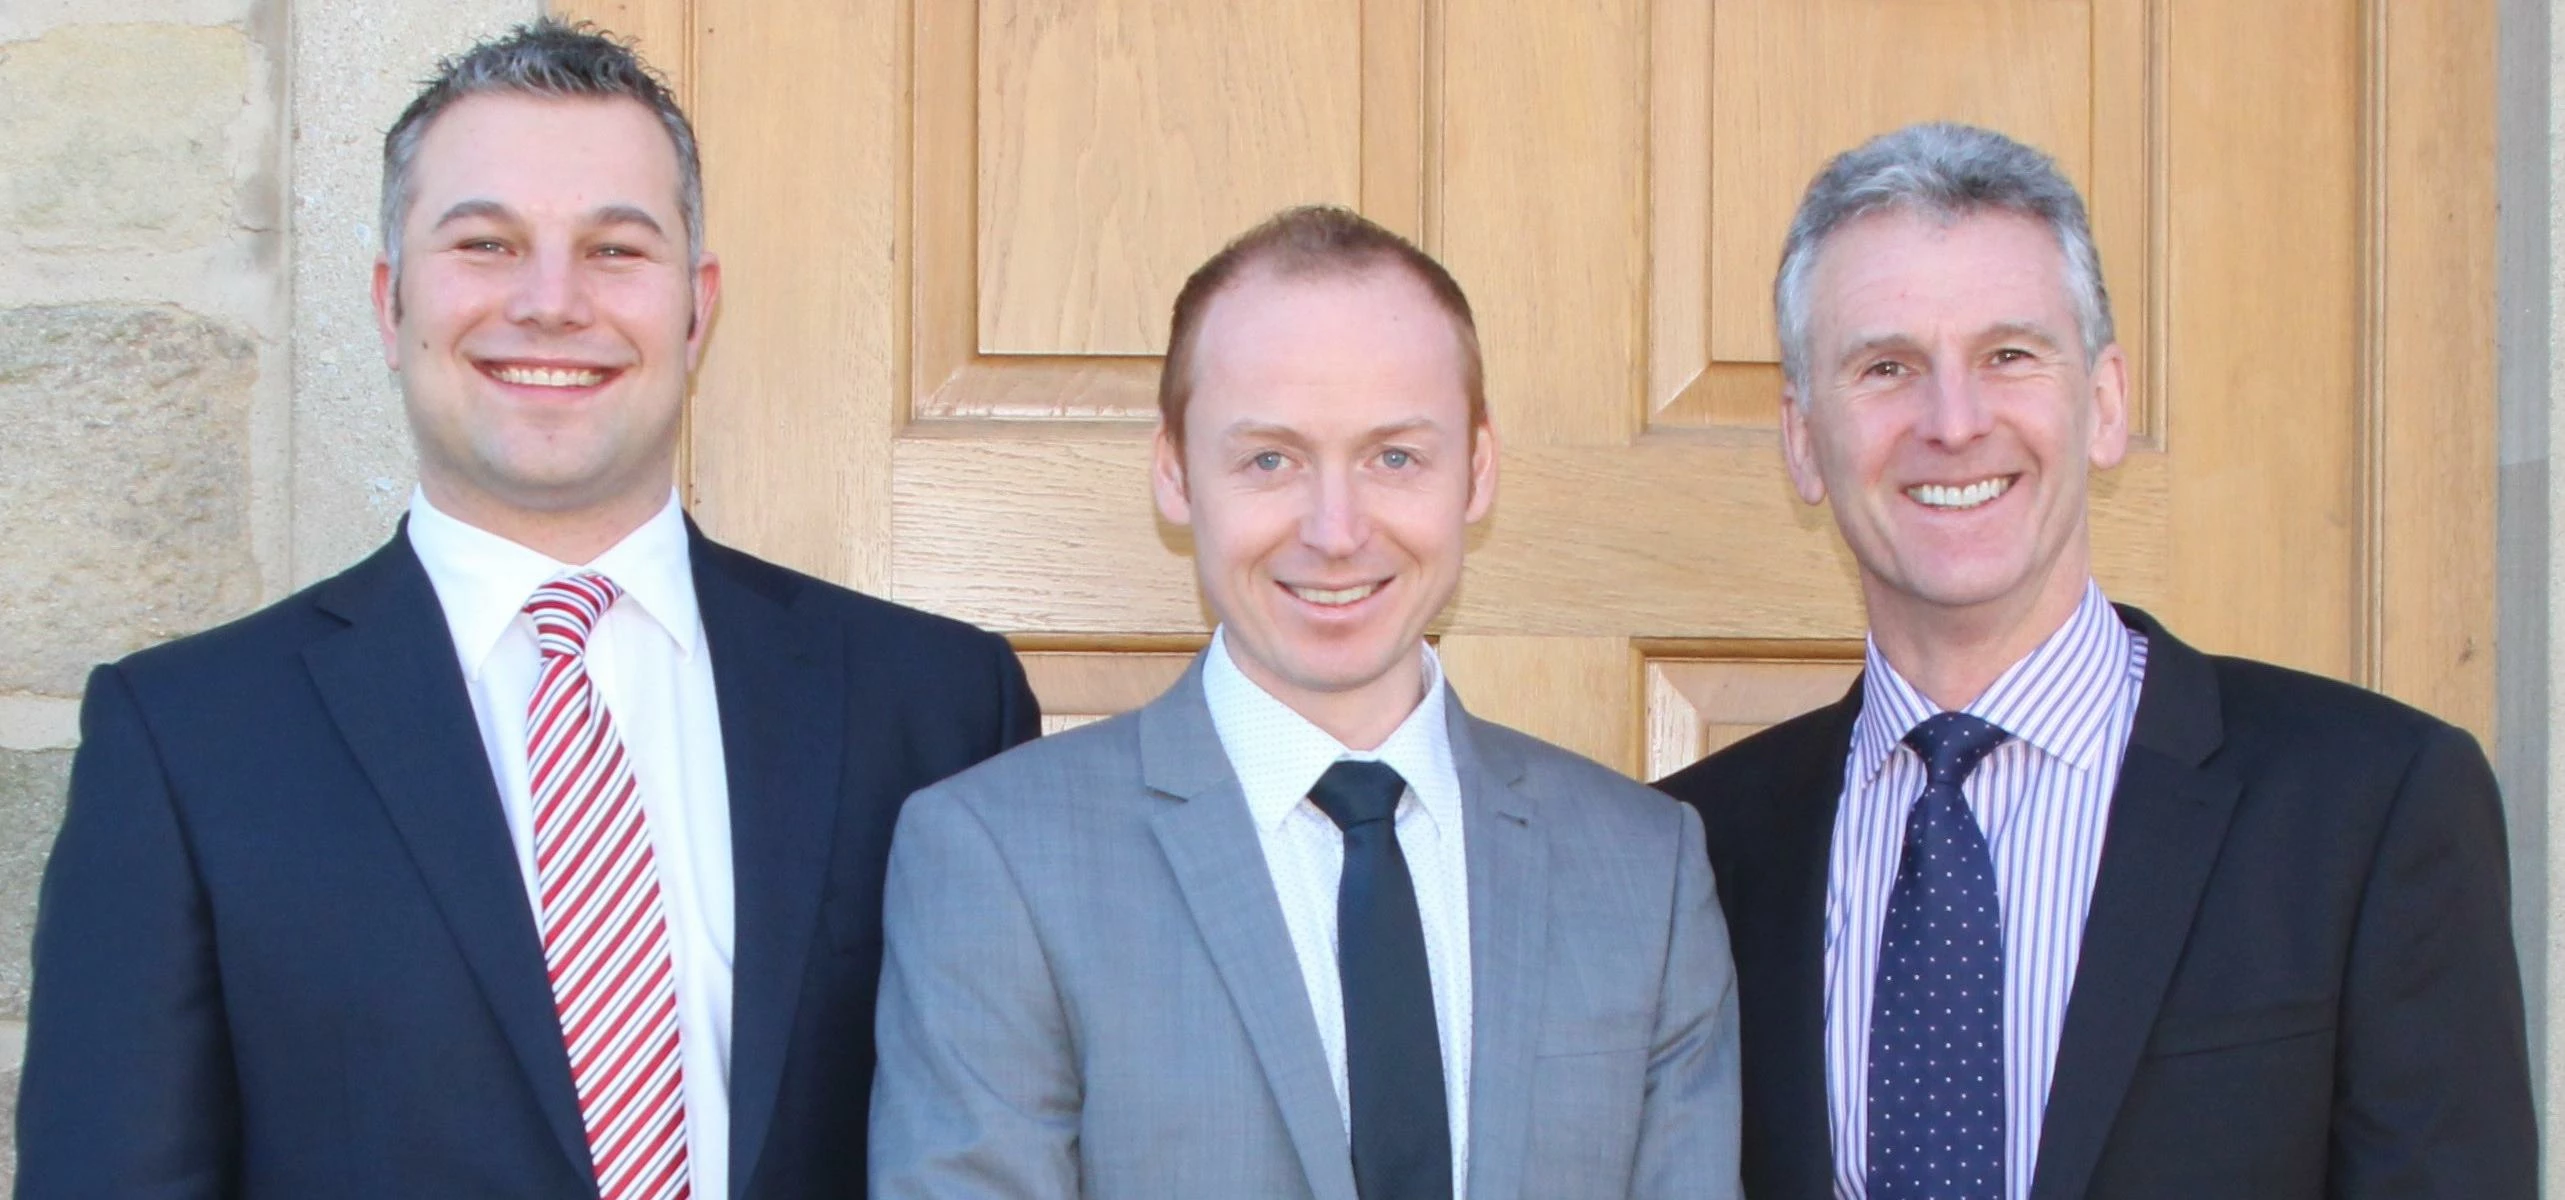 Chris Ambler, technical director, Dave Helm, sales and marketing Director and Mark Ambler, MD